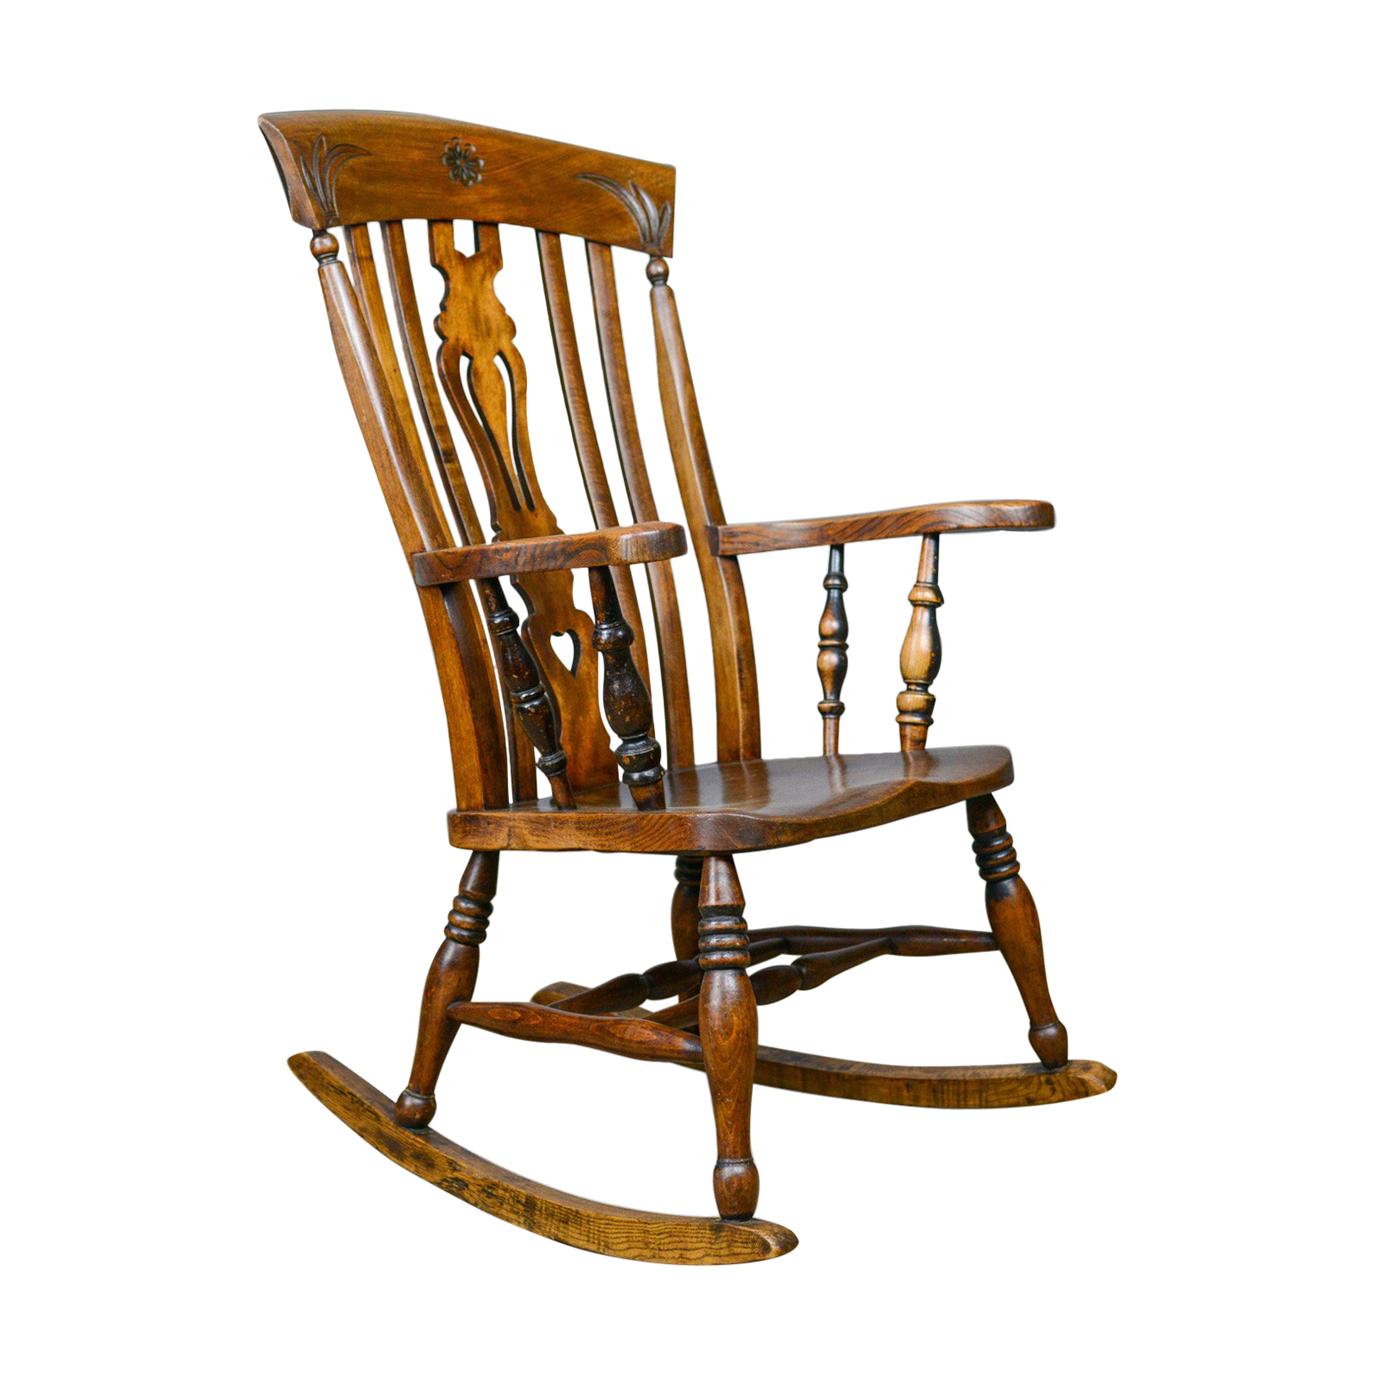 Rocking Chair, Edwardian, Country Kitchen, Windsor Elbow Chair, circa 1910